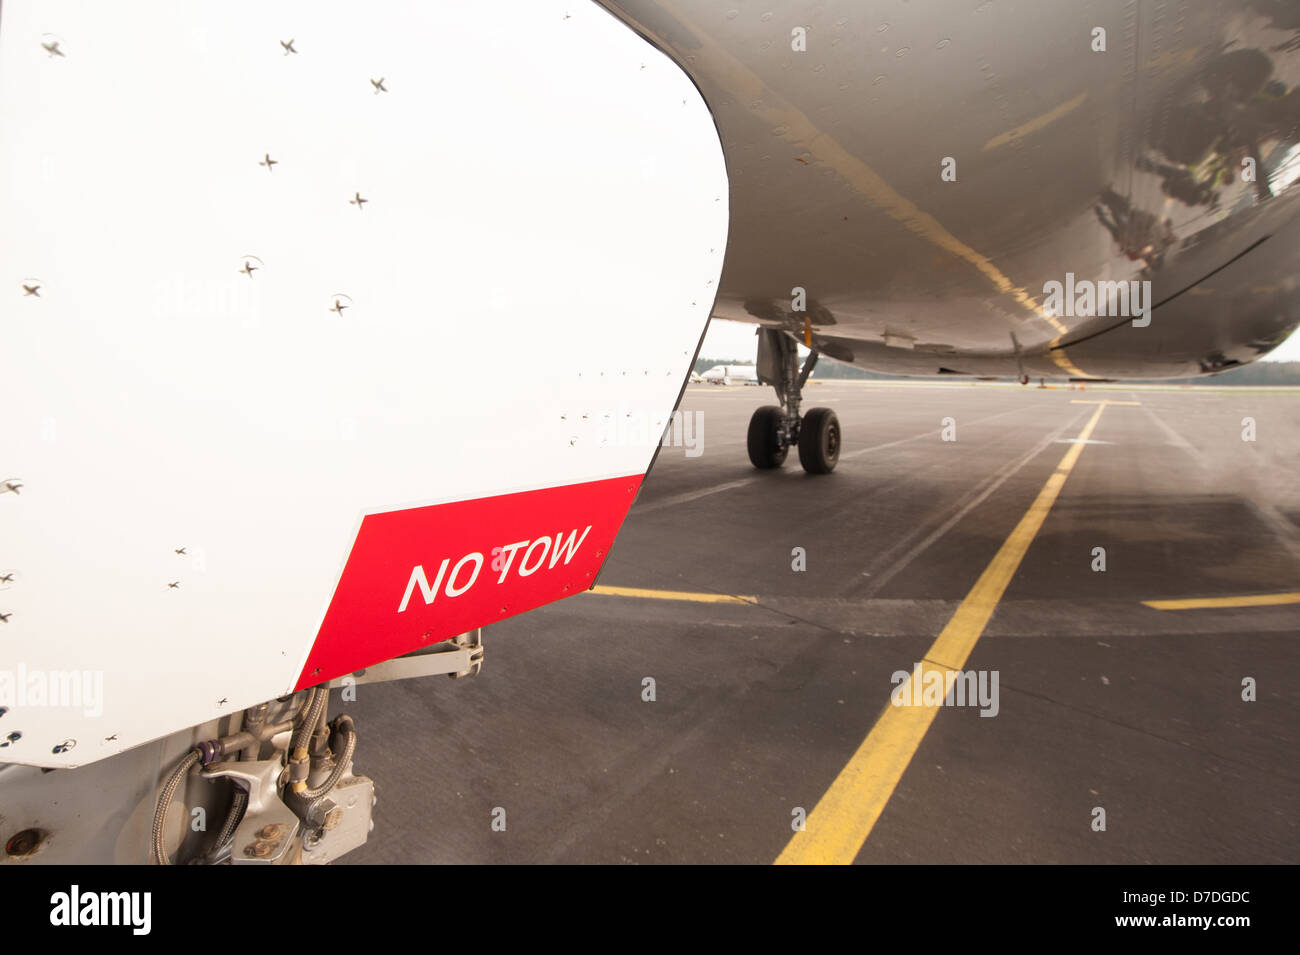 Sign NO TOW on undercarriage of airplane while waiting on runway Stock Photo